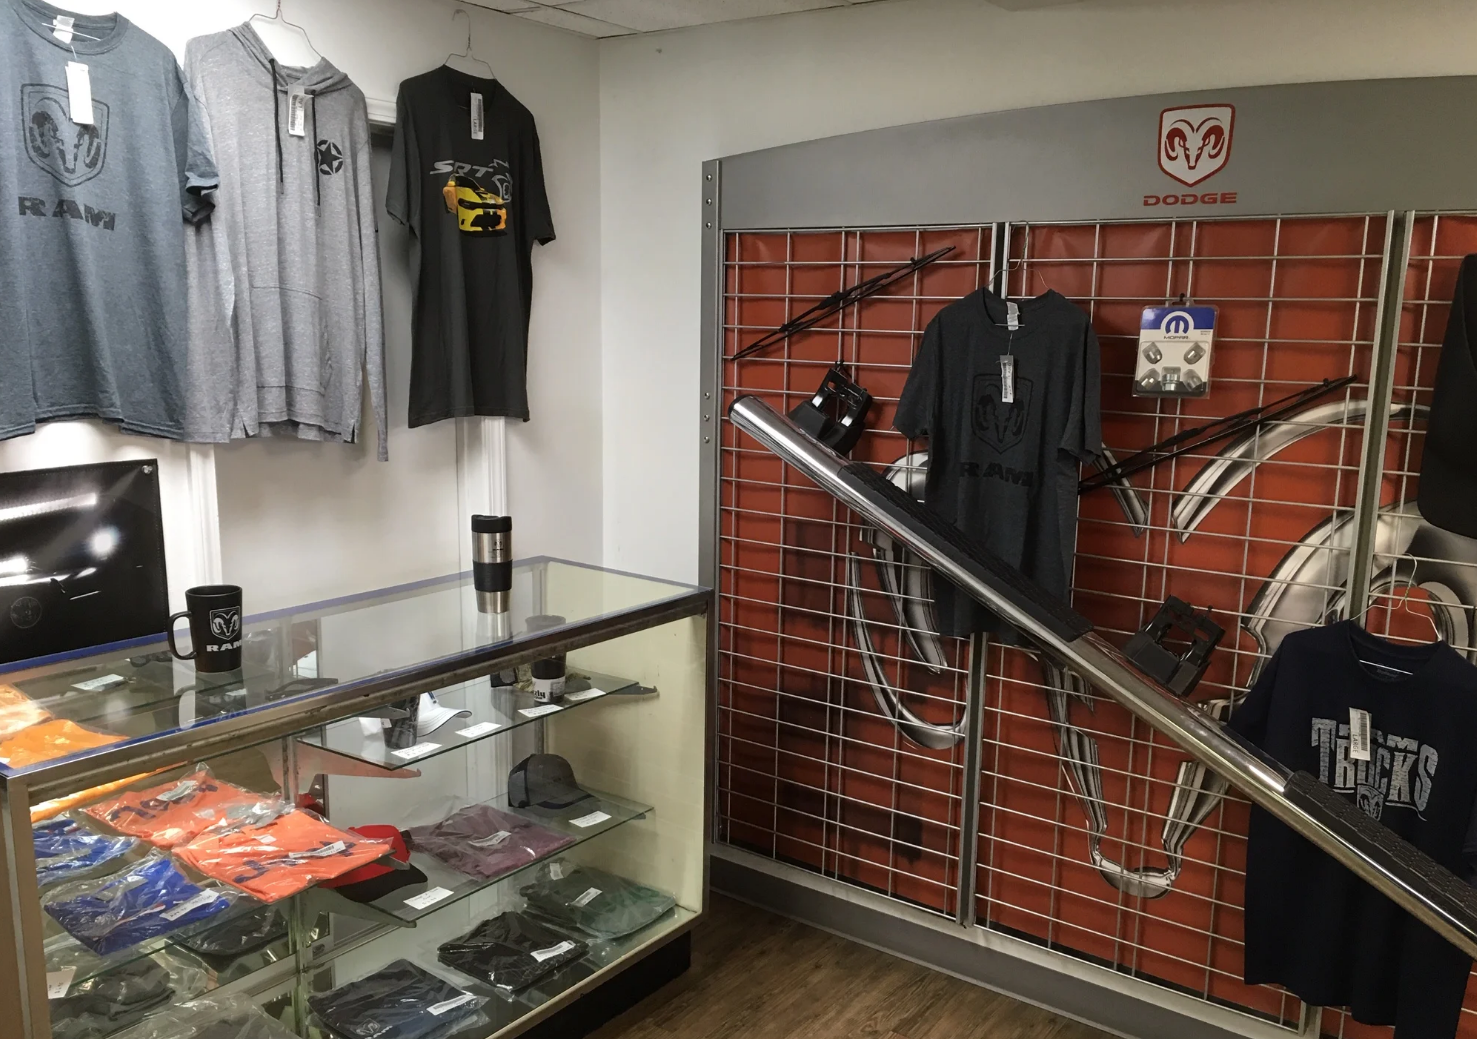 Jeep, Dodge, Chrysler & Ram merchandise and appearal